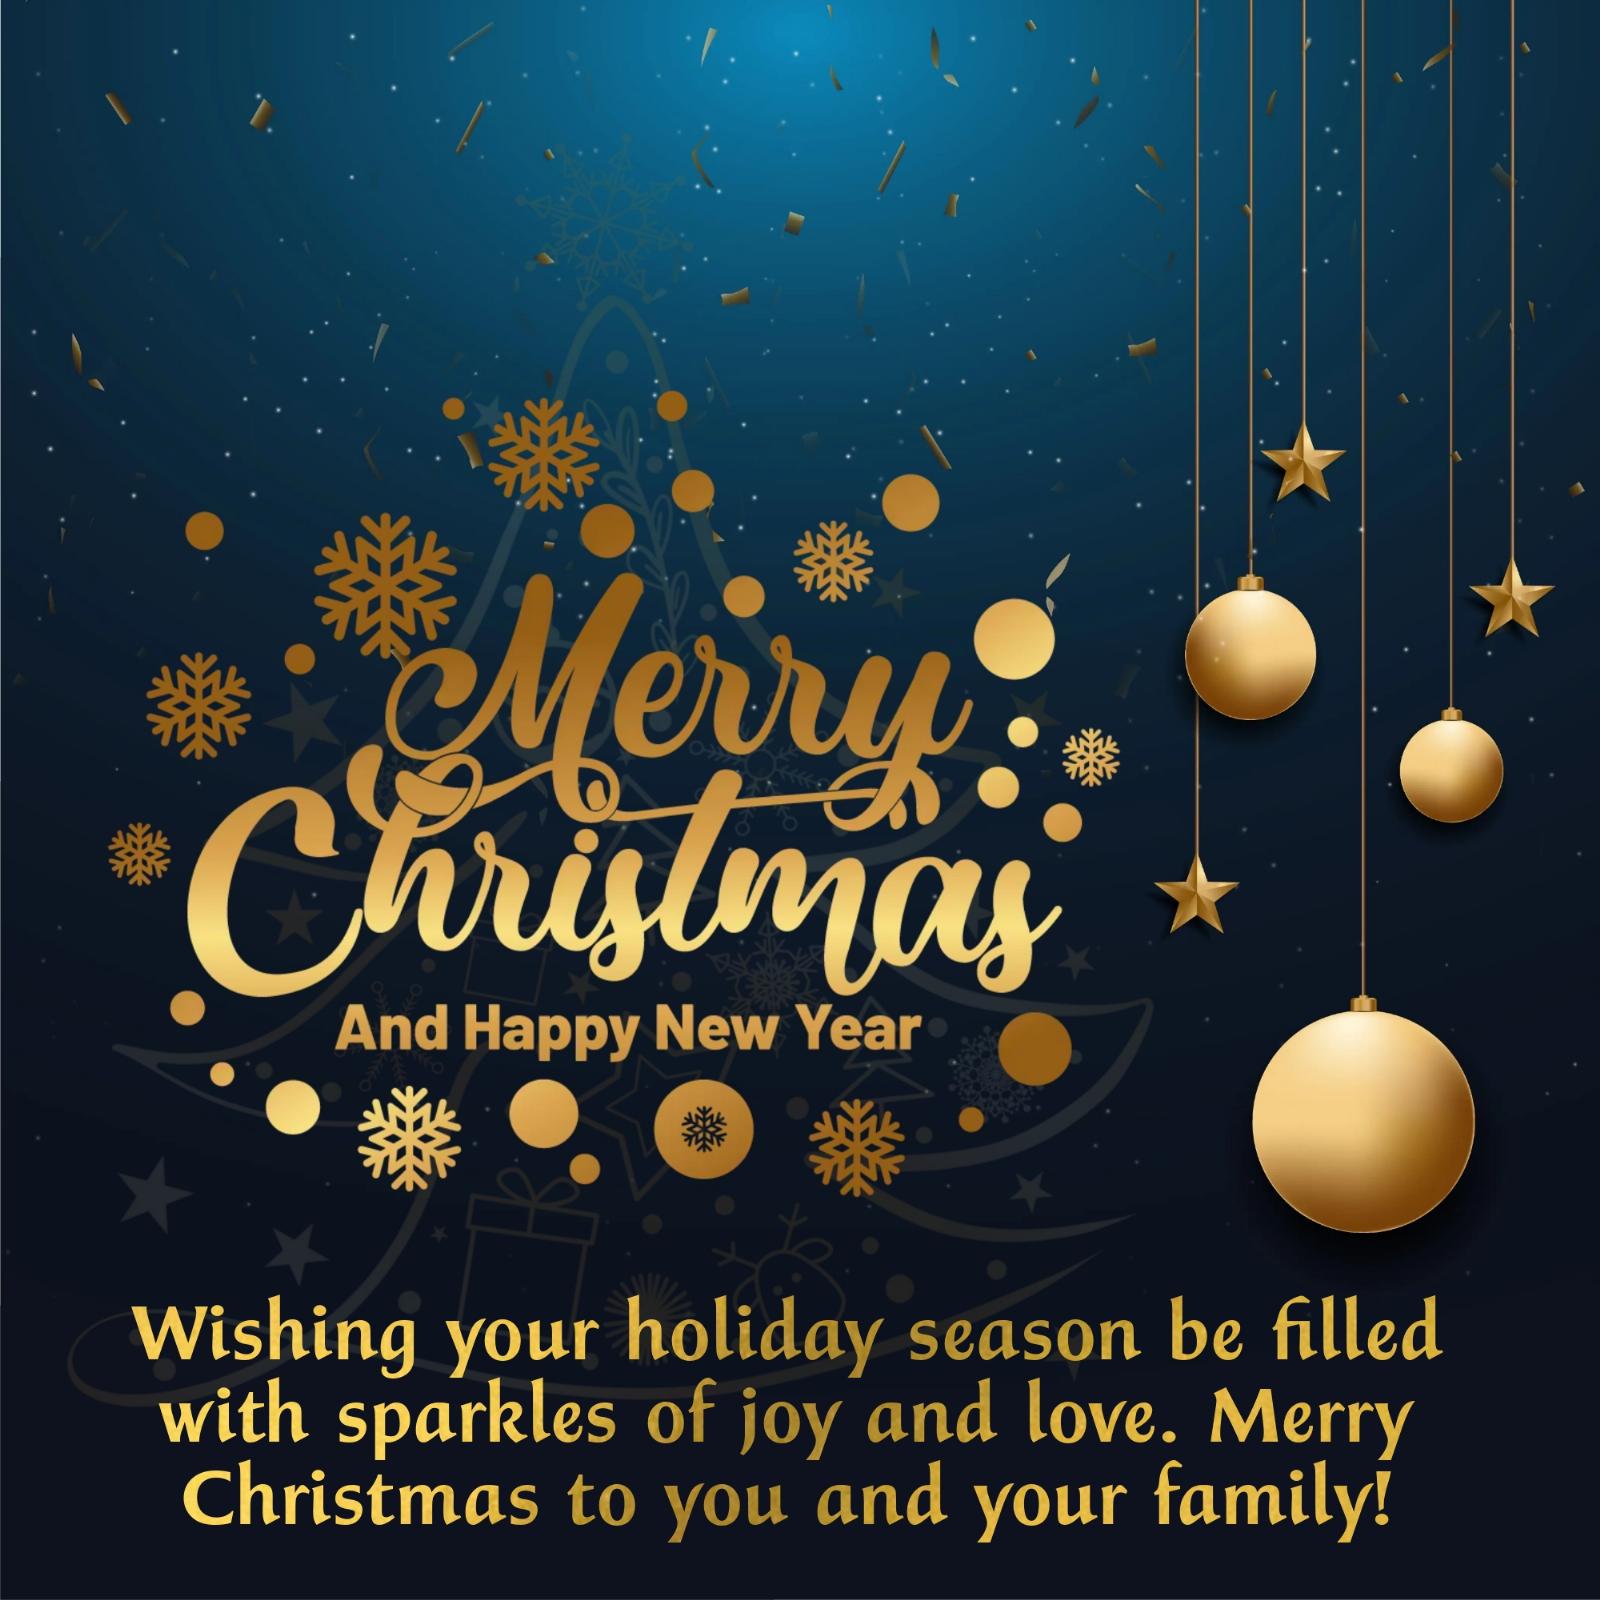 Wishing your holiday season be filled with sparkles of joy